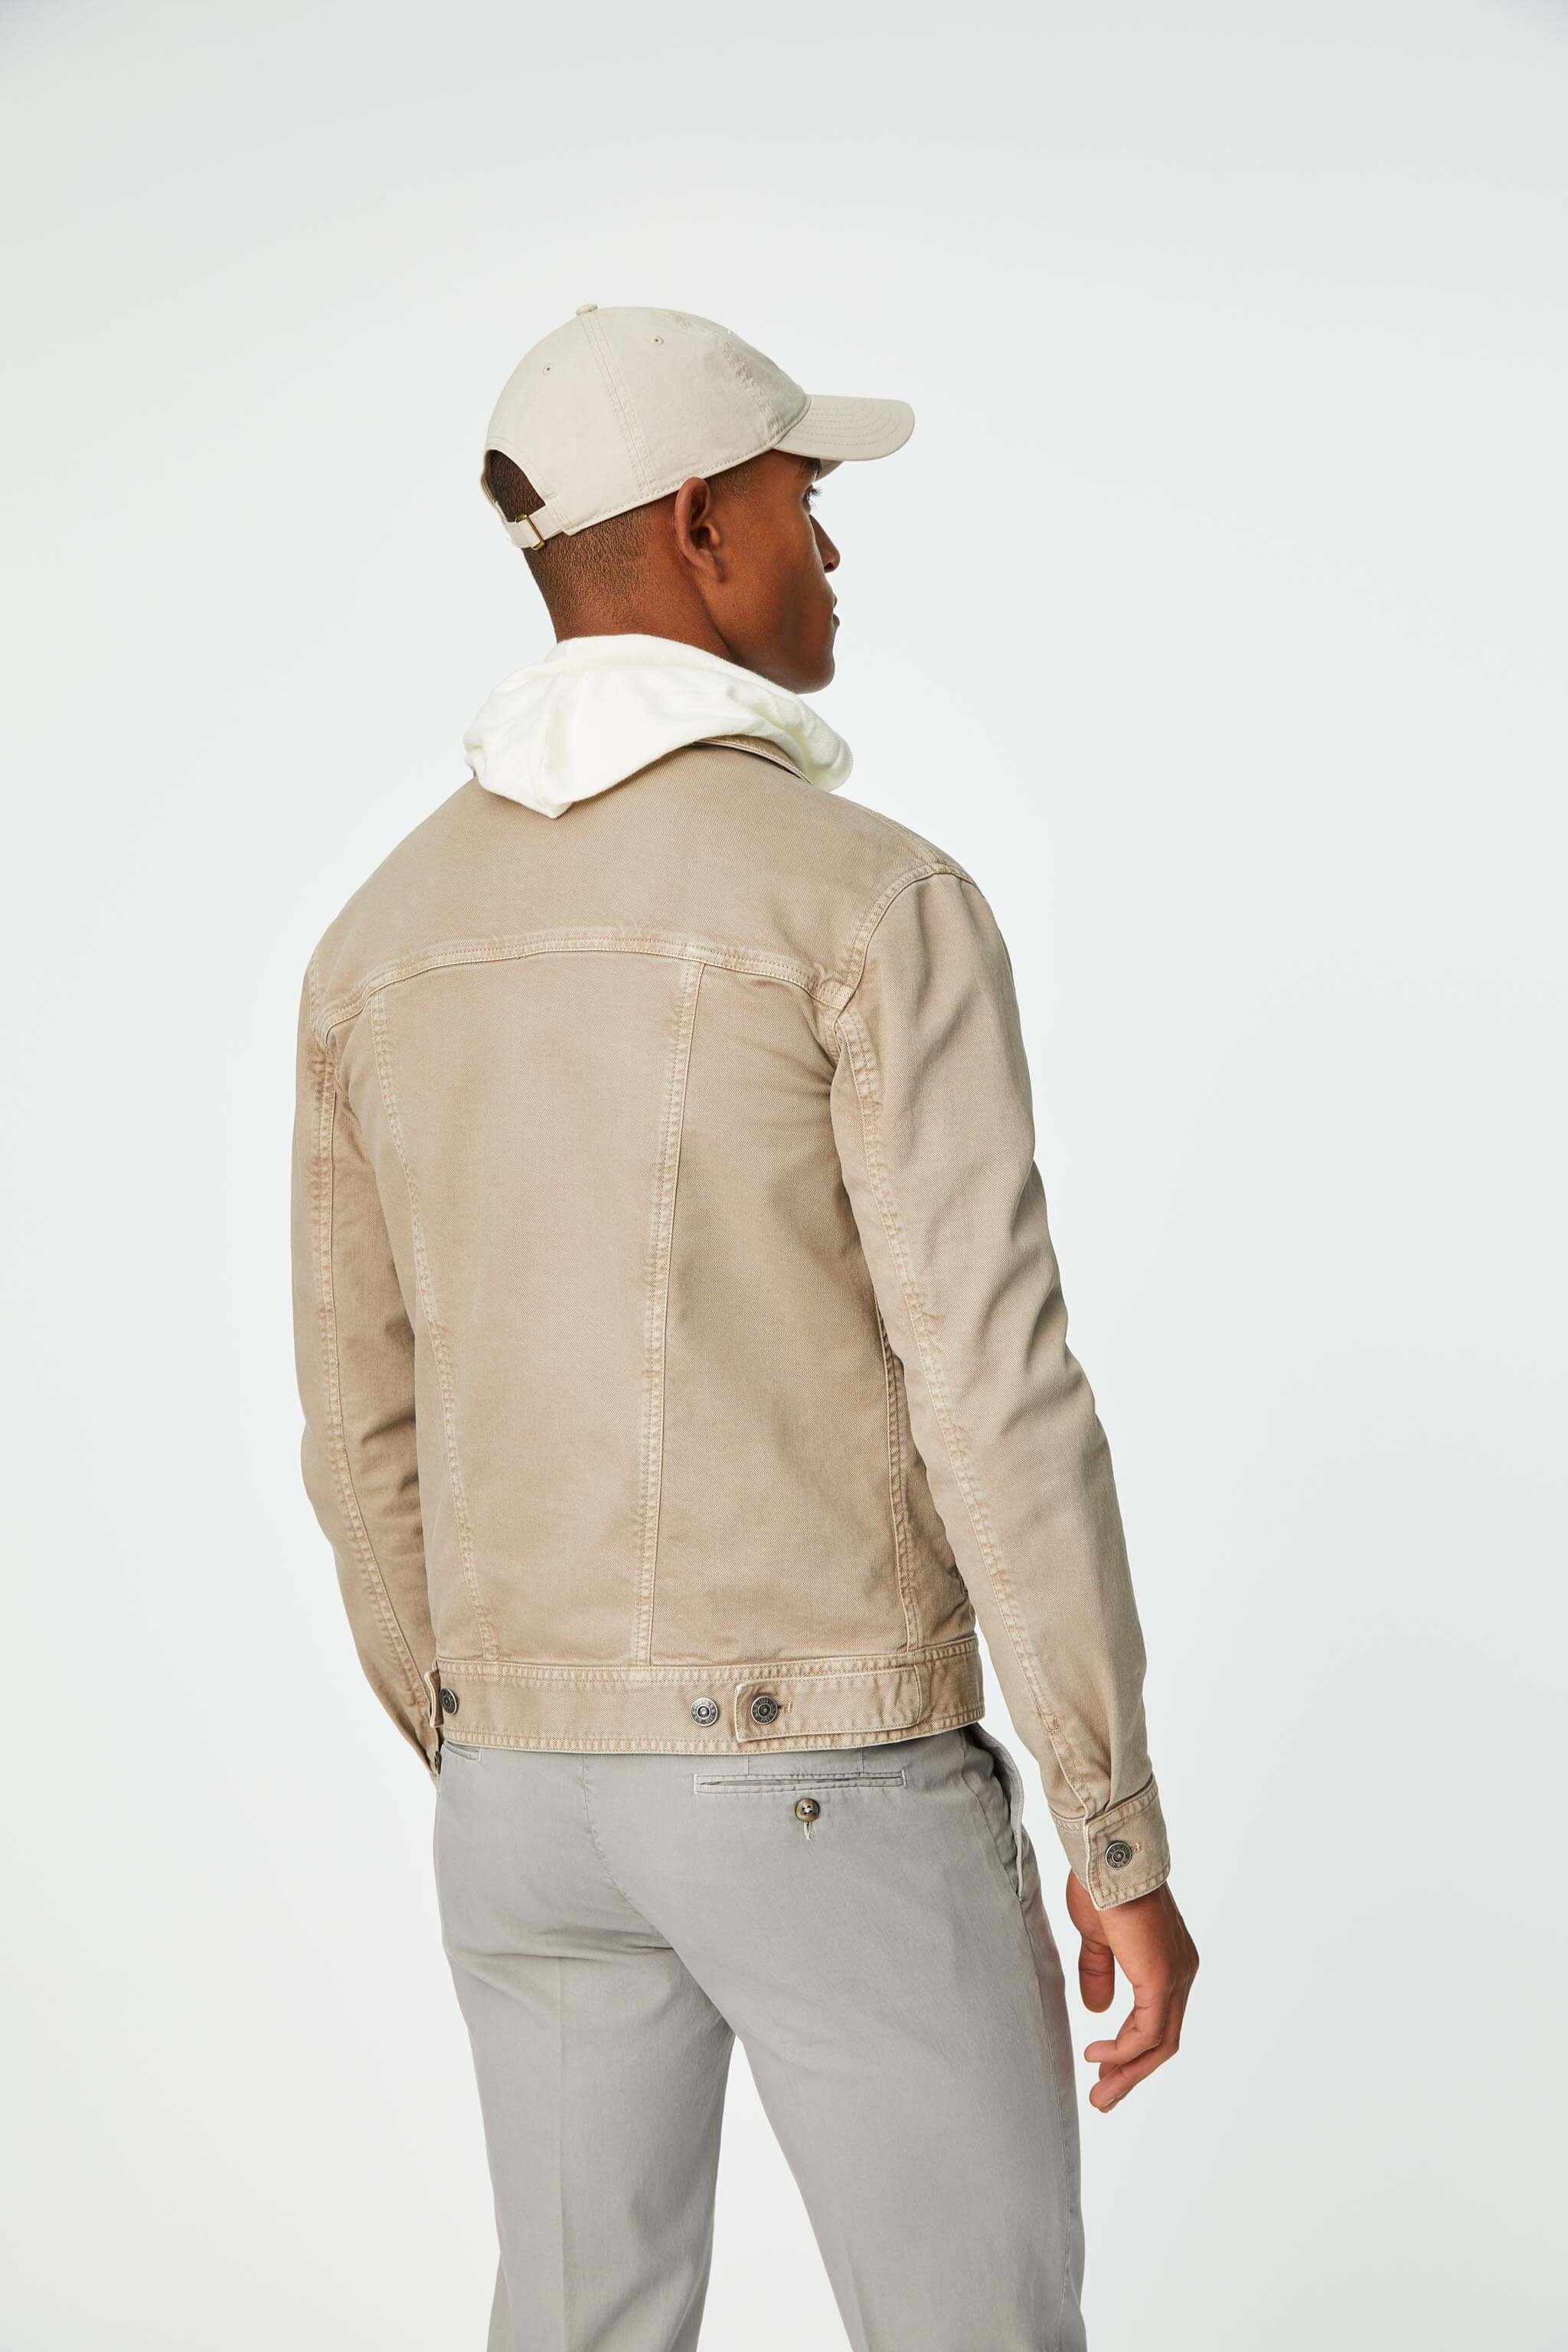 Garment-dyed jacket in dove gray